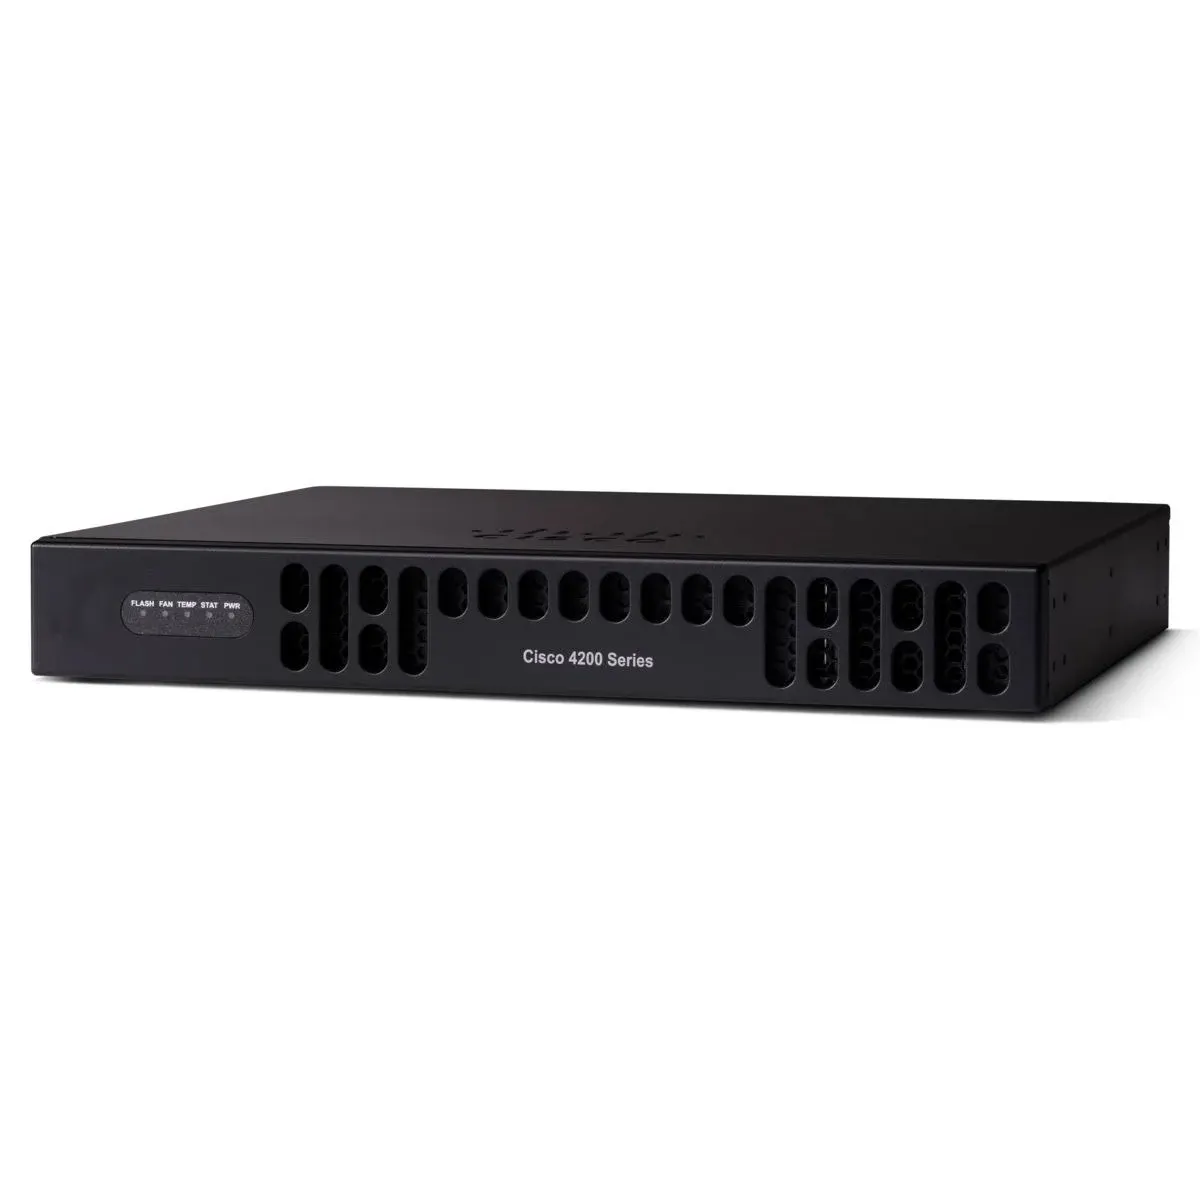 NEW original ISR4321/K9 4300 Series Integrated Services Routers for ISR4321-SEC/K9 ISR4321-AX/K9 ISR4321-V/K9 router